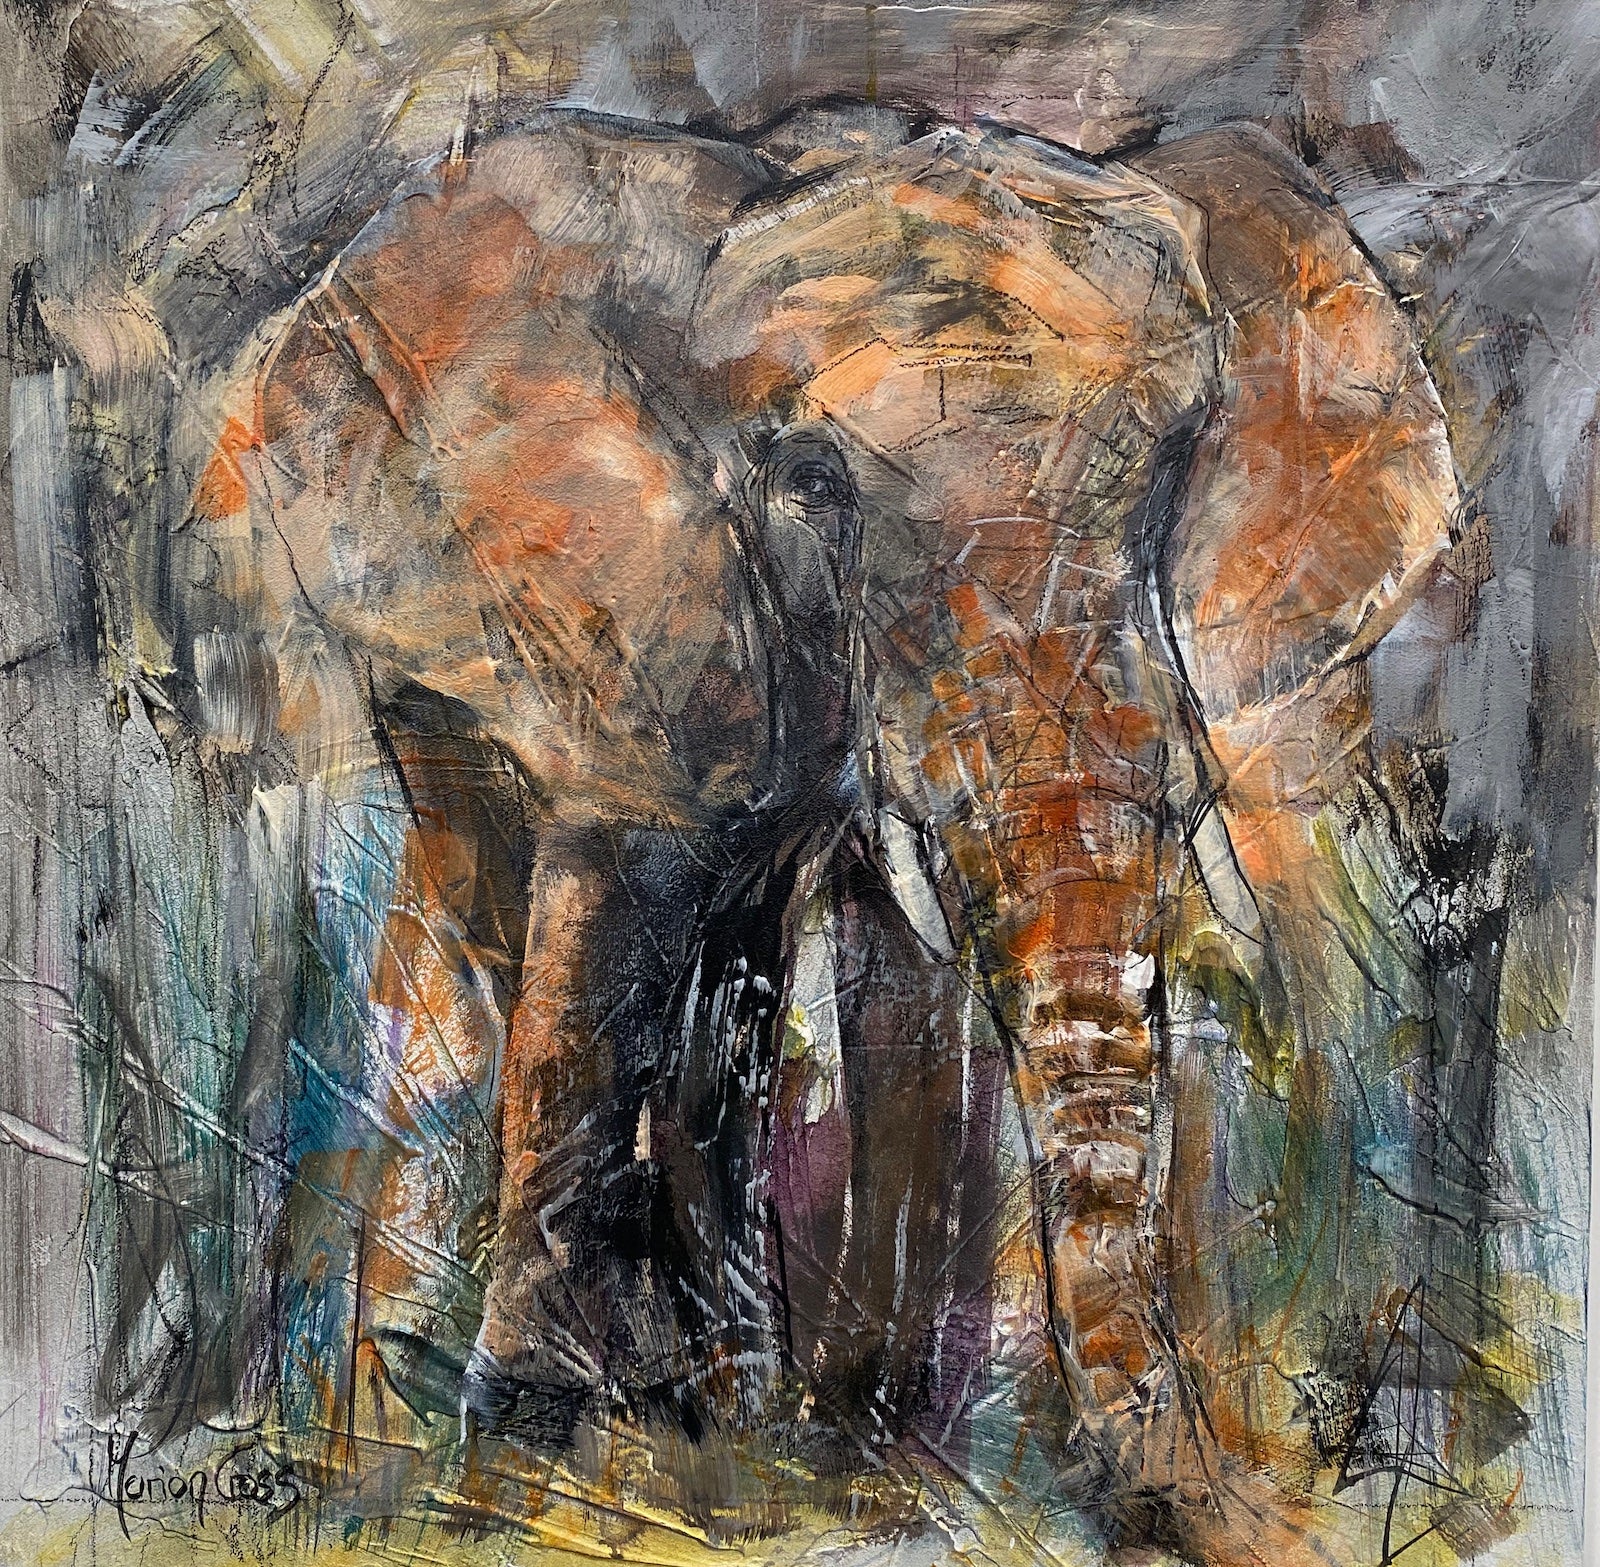 Next to Me in Africa- ORIGINAL PAINTING